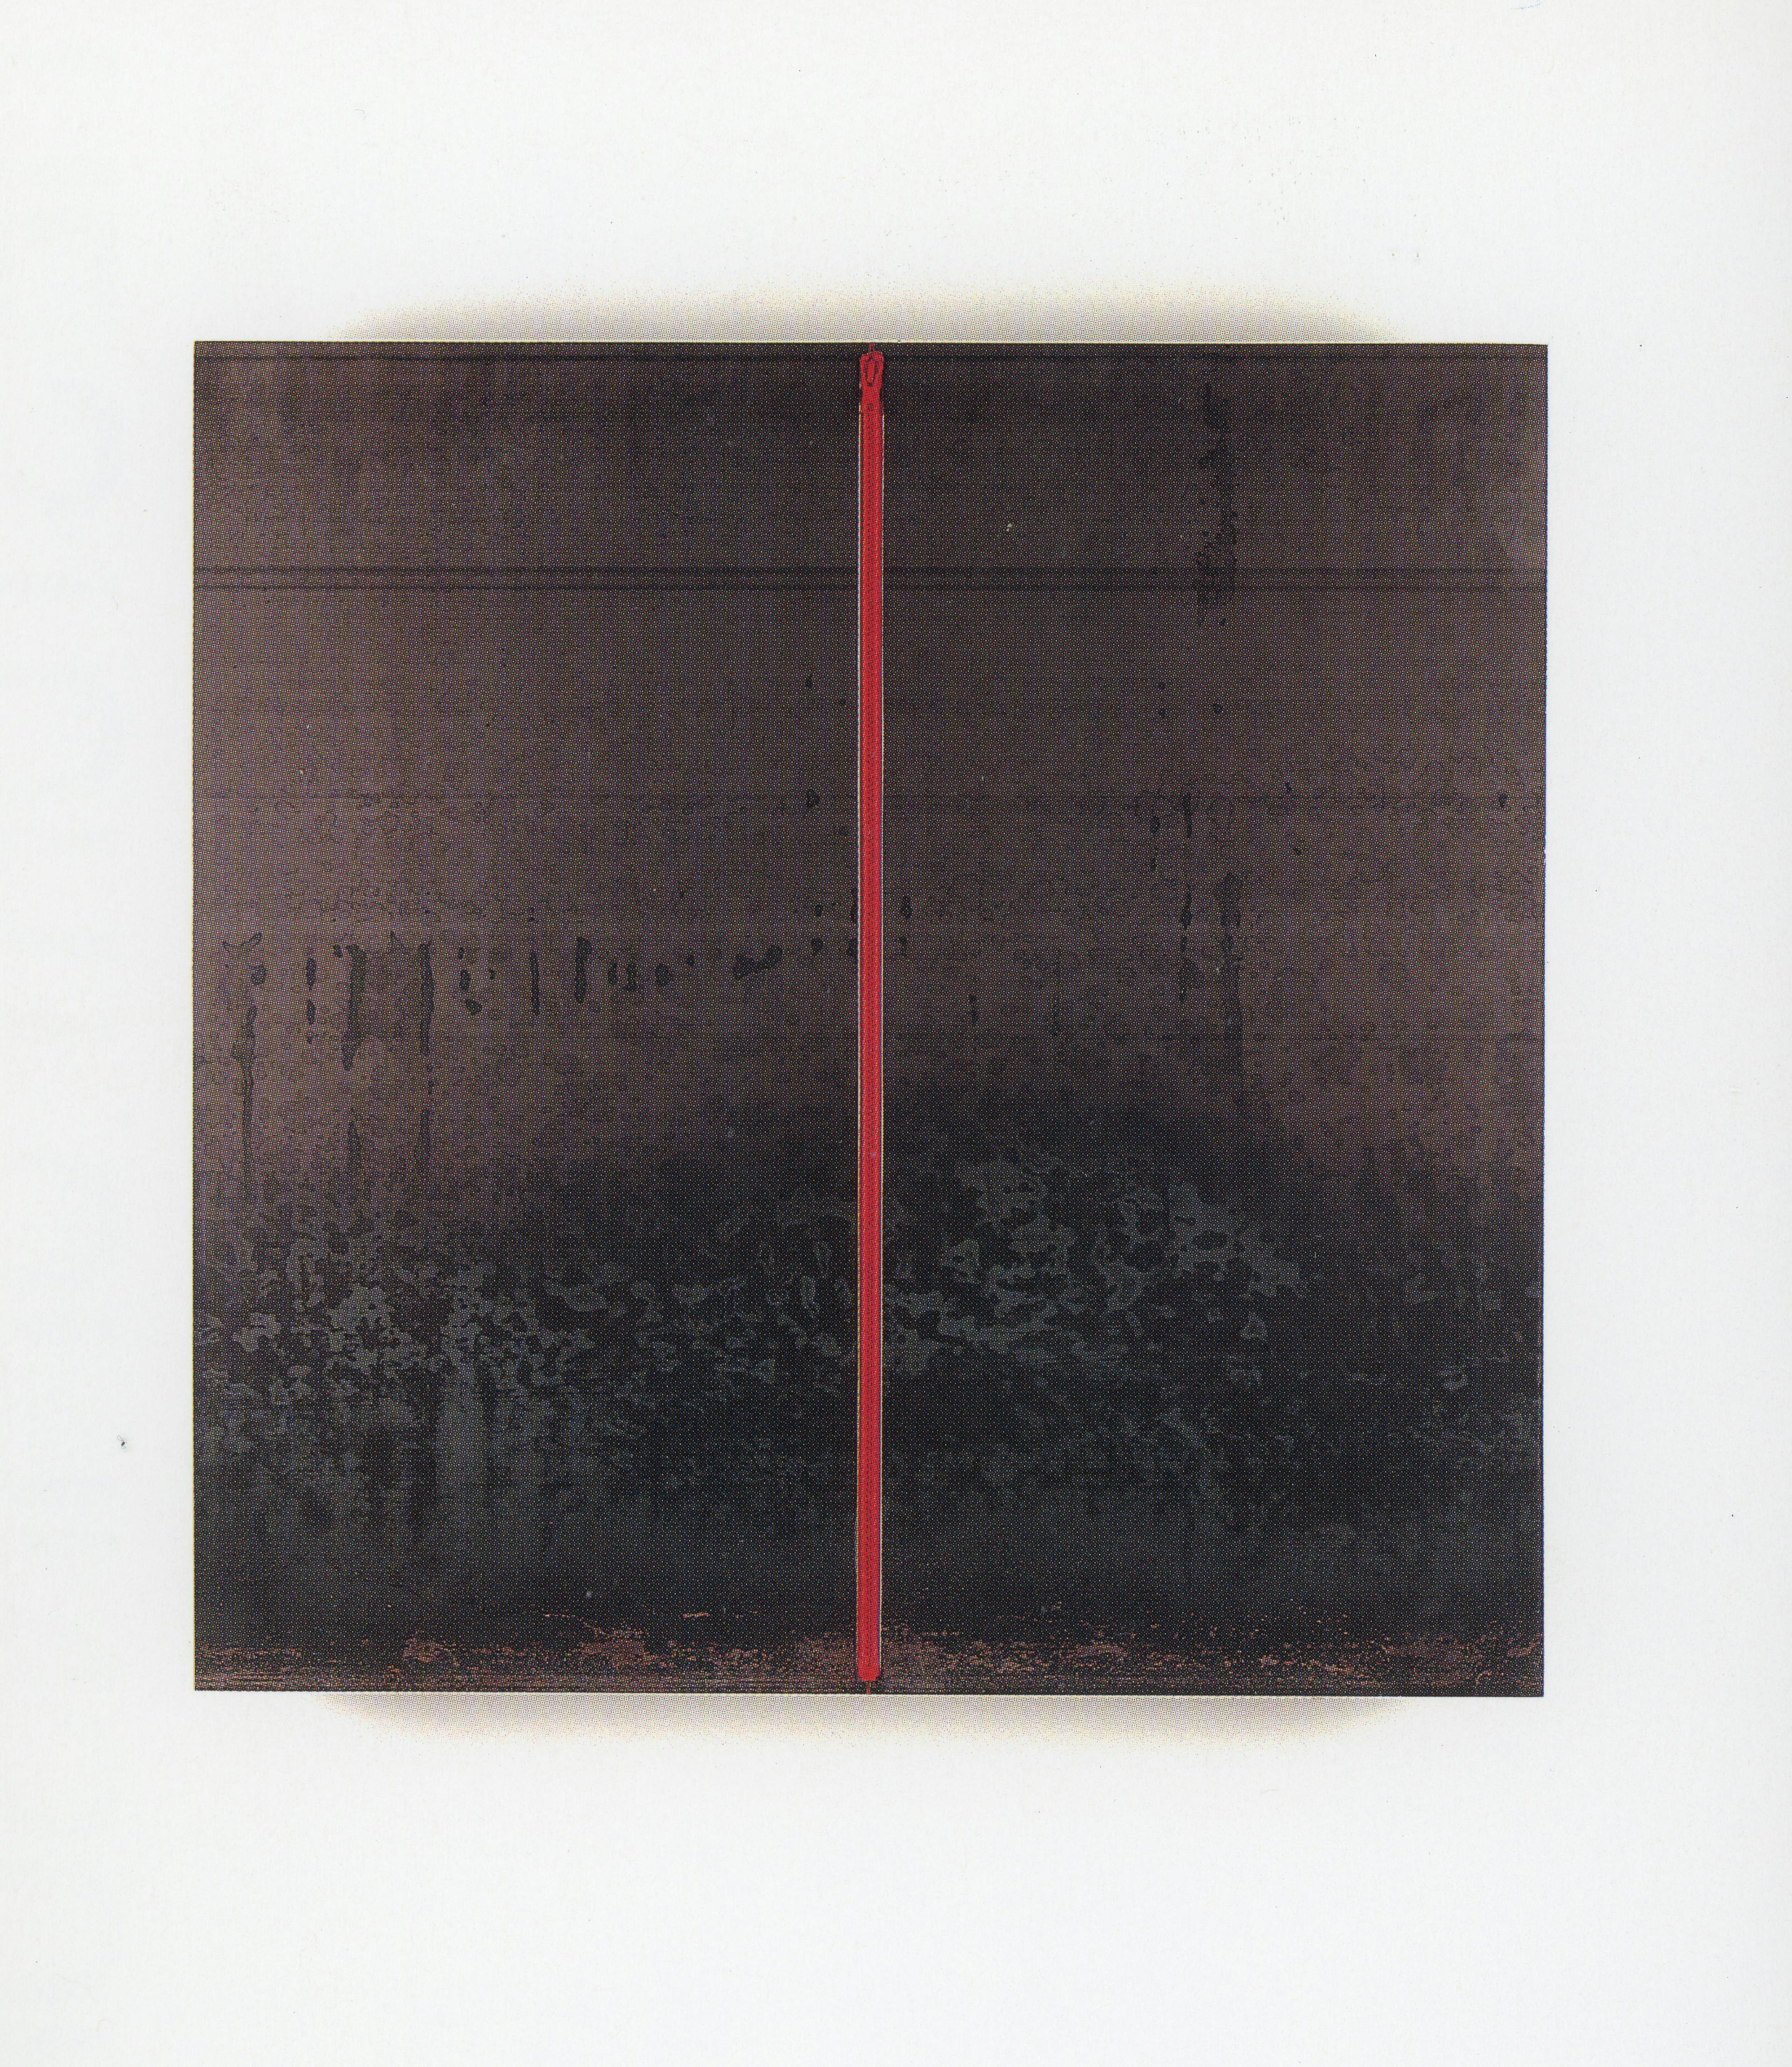 A square-shaped artwork is installed on the gallery wall. Some oil-stain like patterns are visible on the surface of the work. It’s overall colour is black. A red thin vertical line runs  the middle of the work.